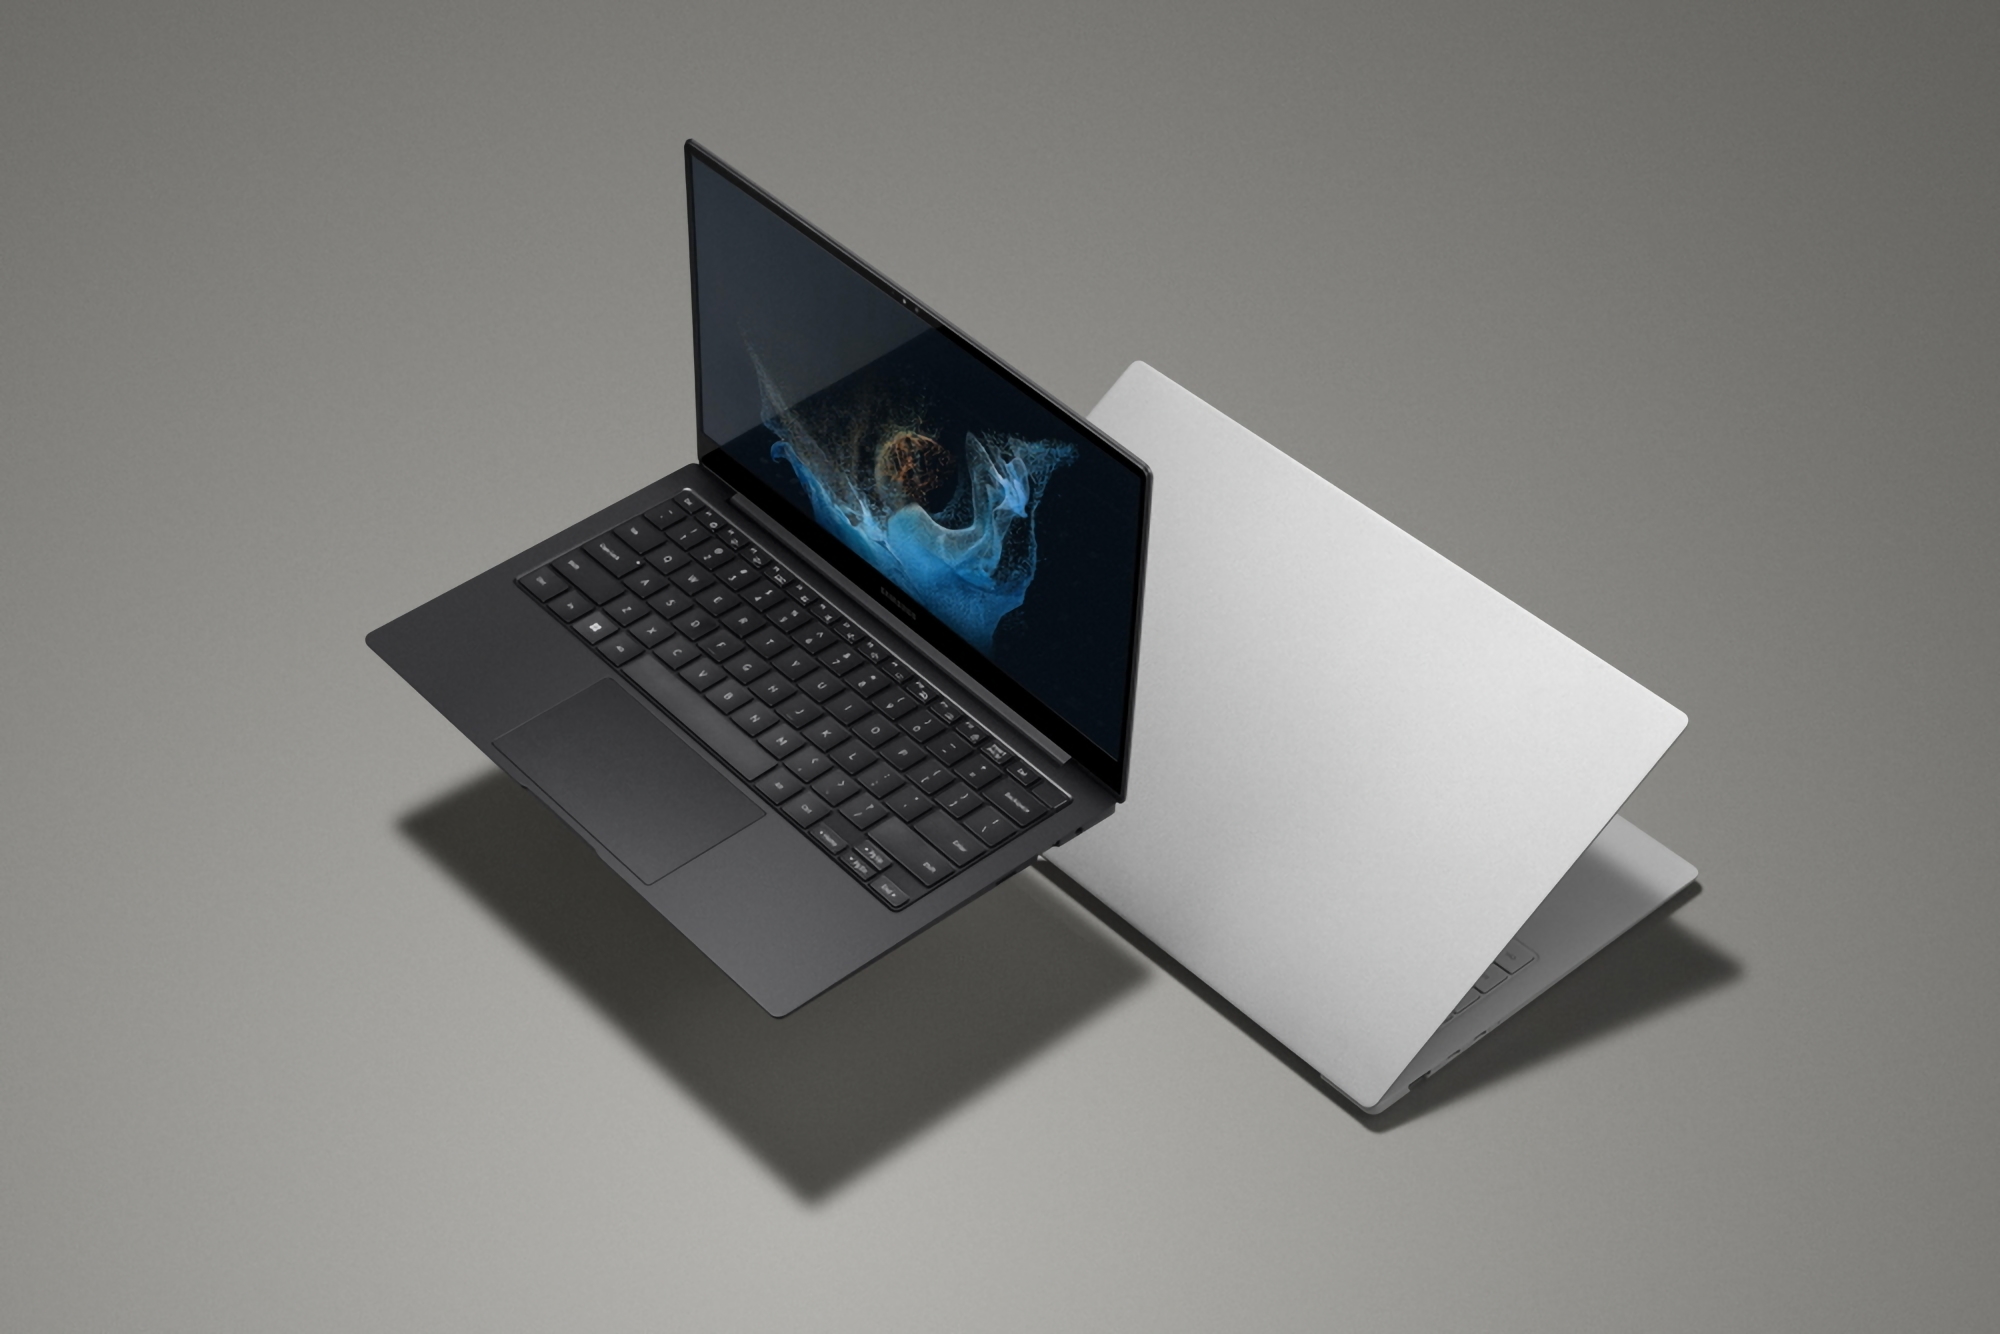 Leaked: Samsung Galaxy Book 3 Pro will get an AMOLED screen up to 16 inches, Intel's 13th-generation chip and Windows 11 out of the box